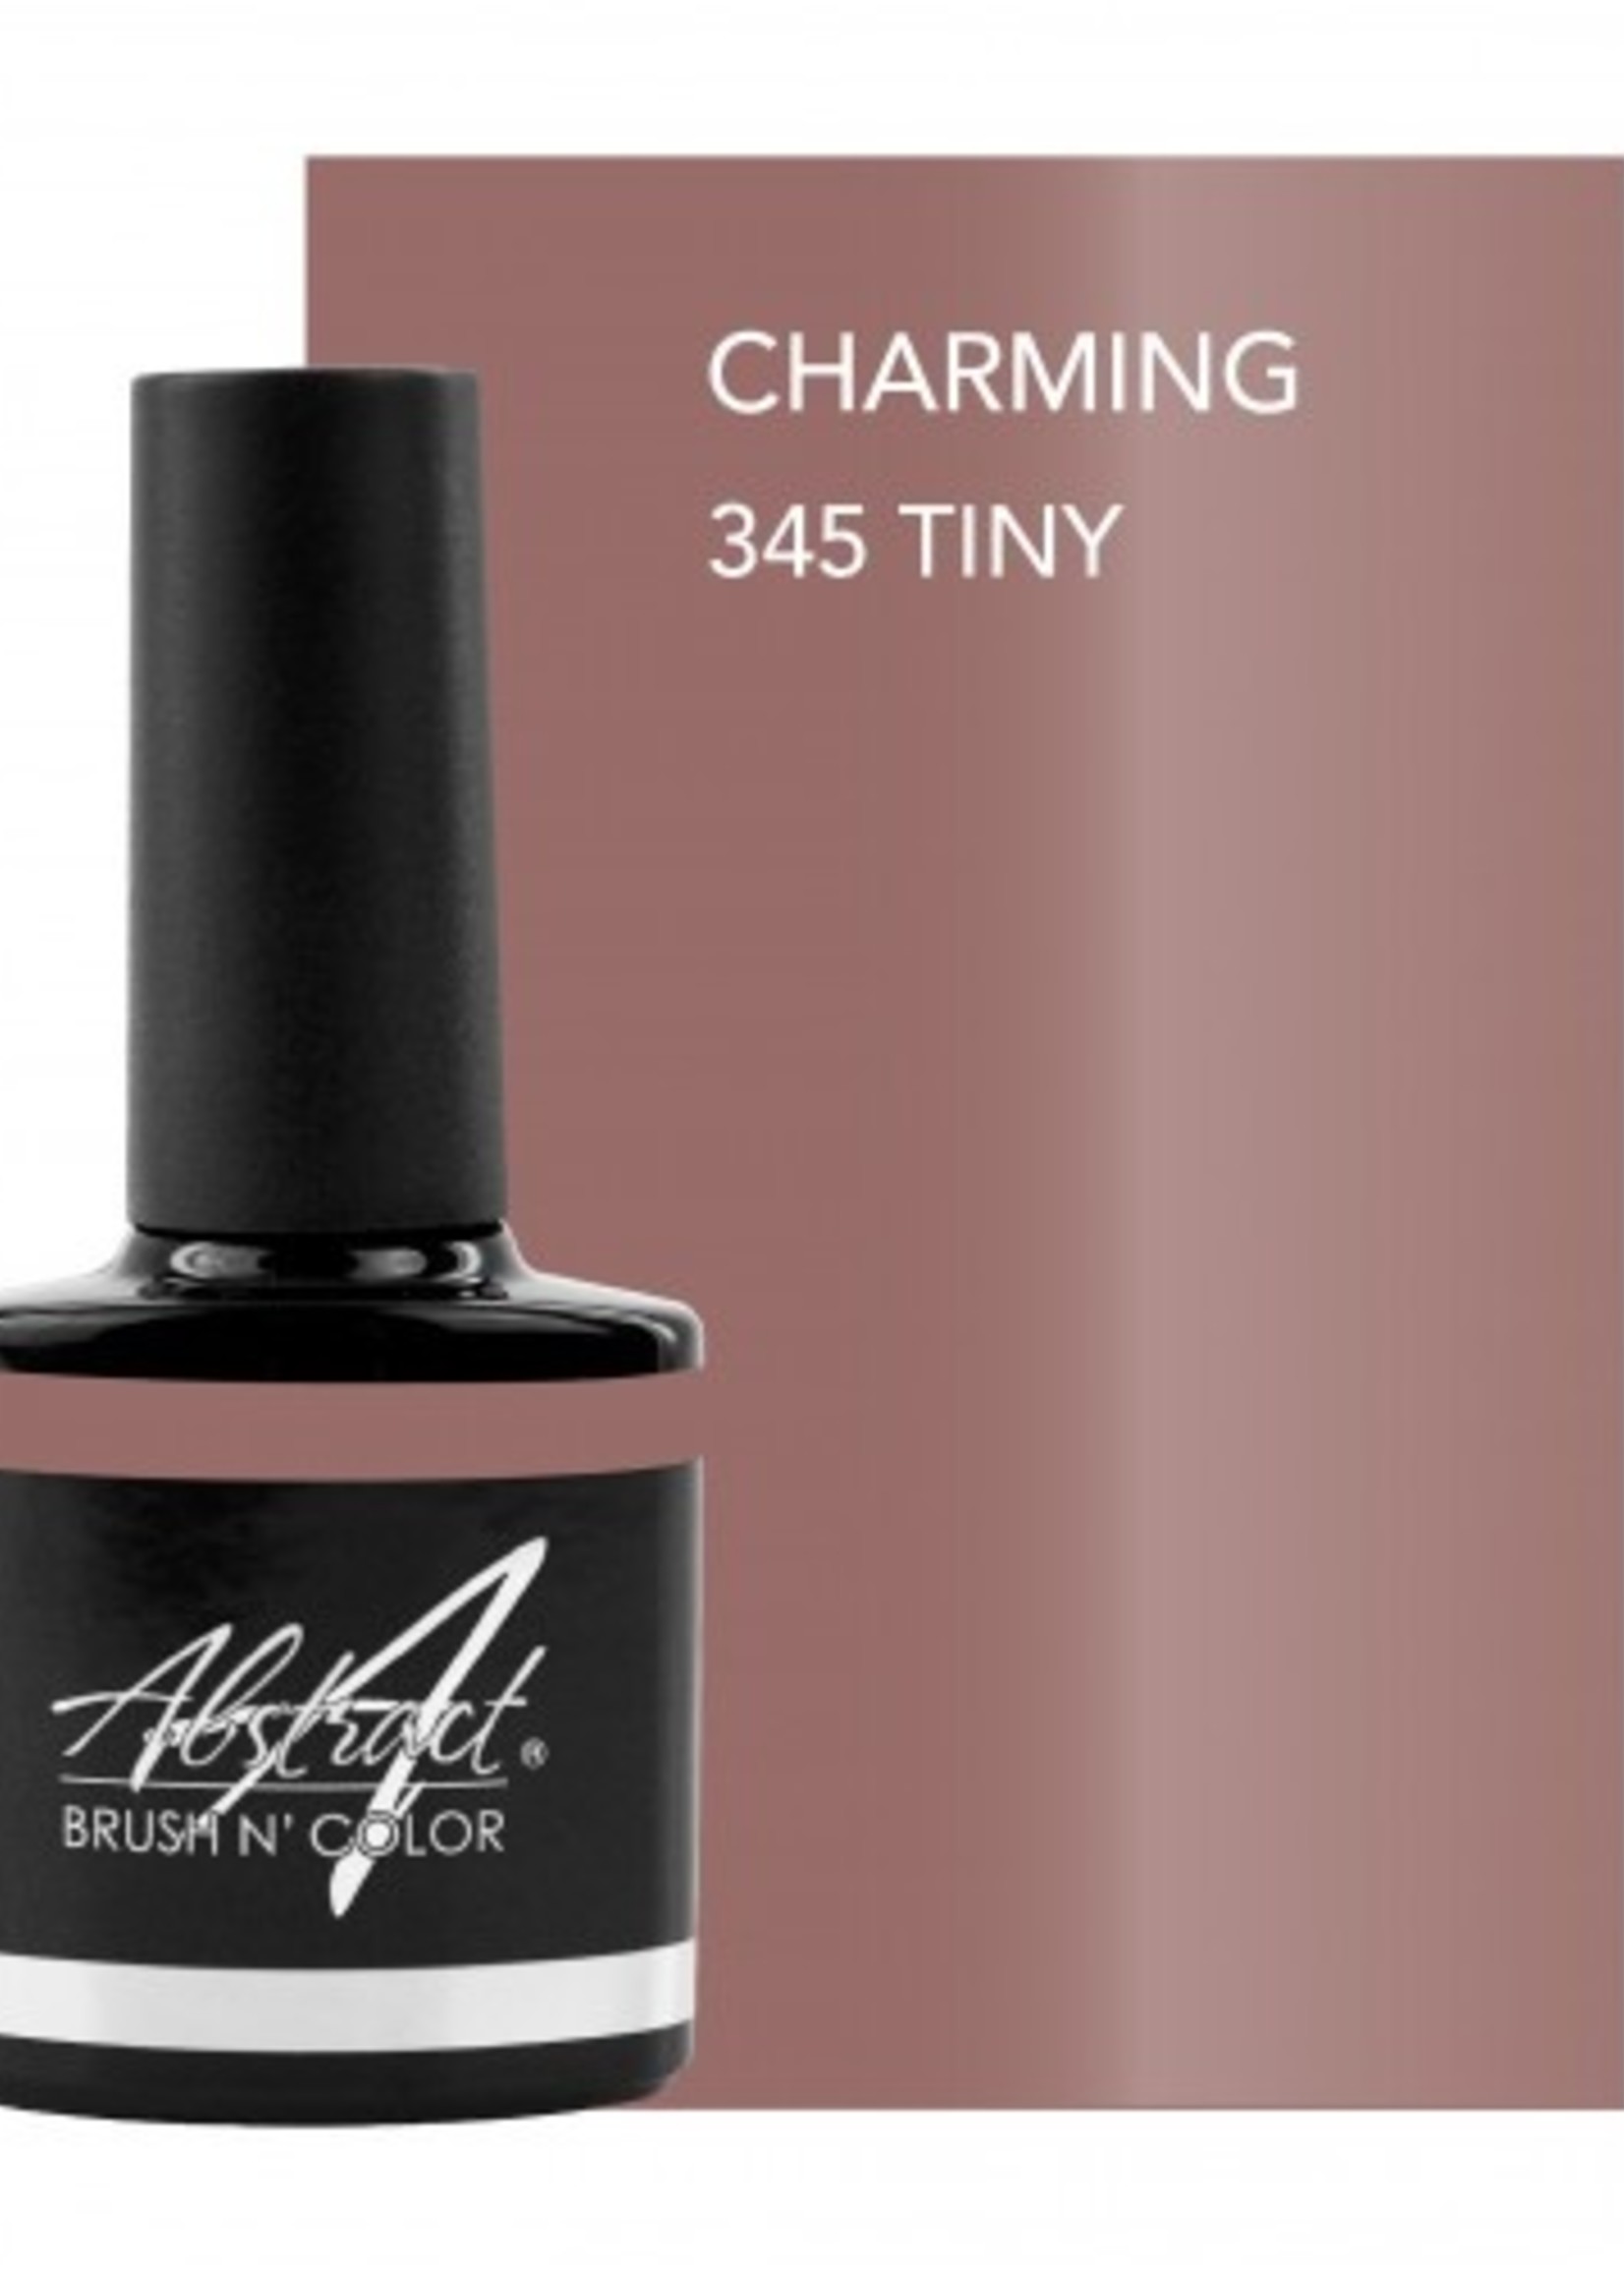 Abstract® Brush N' Color tiny 7,5 ml Charming